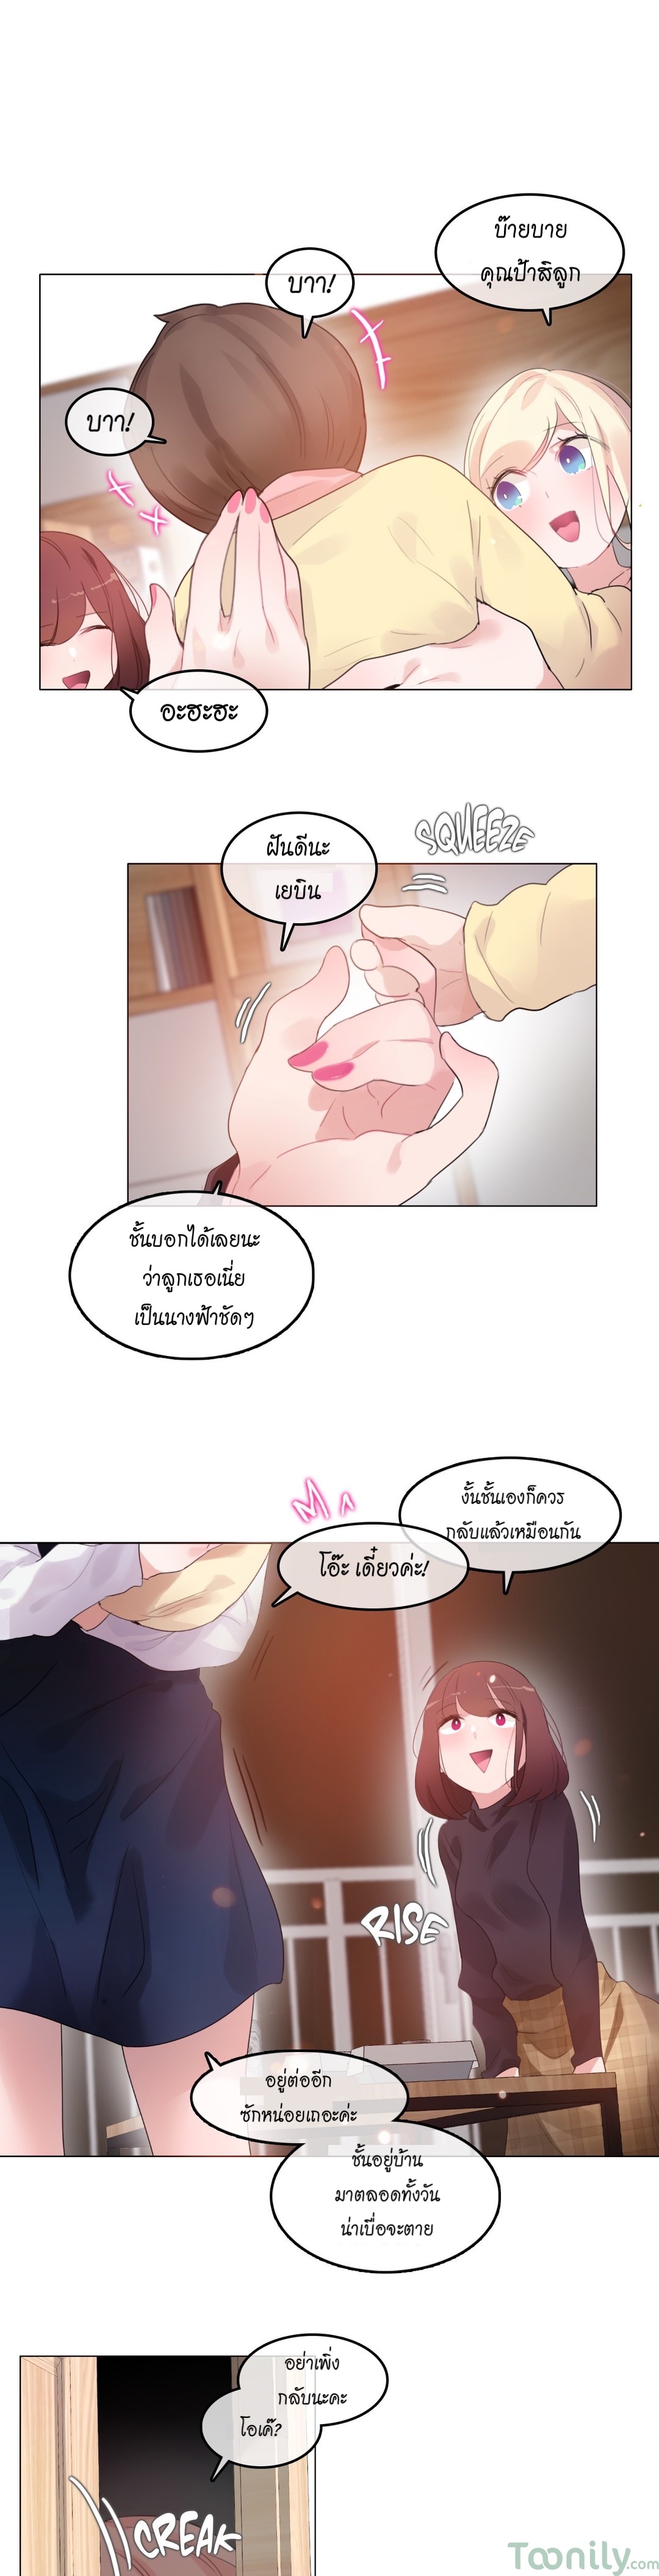 A Pervert’s Daily Life62 (7)